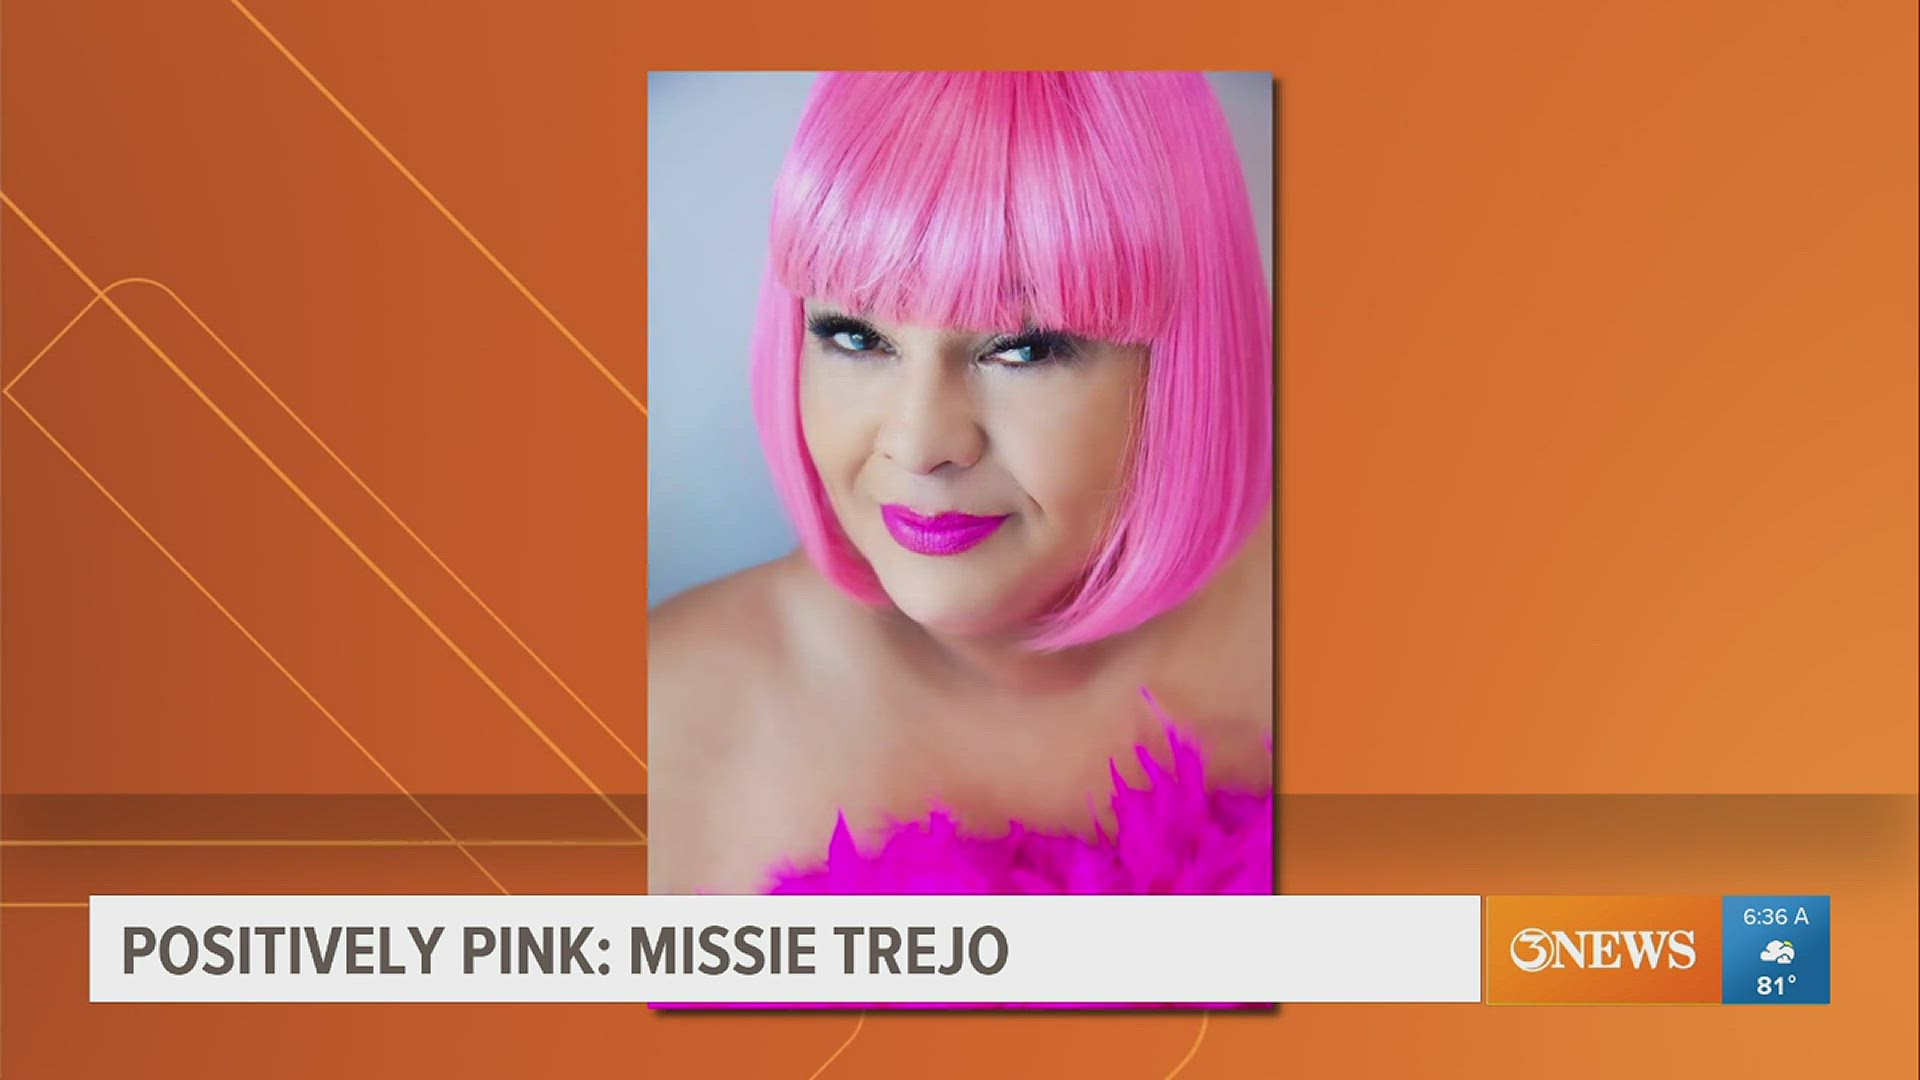 Missie Trejo has no family history of breast cancer. However, after swelling under her arms led to a doctors visit and screening, her life quickly changed.